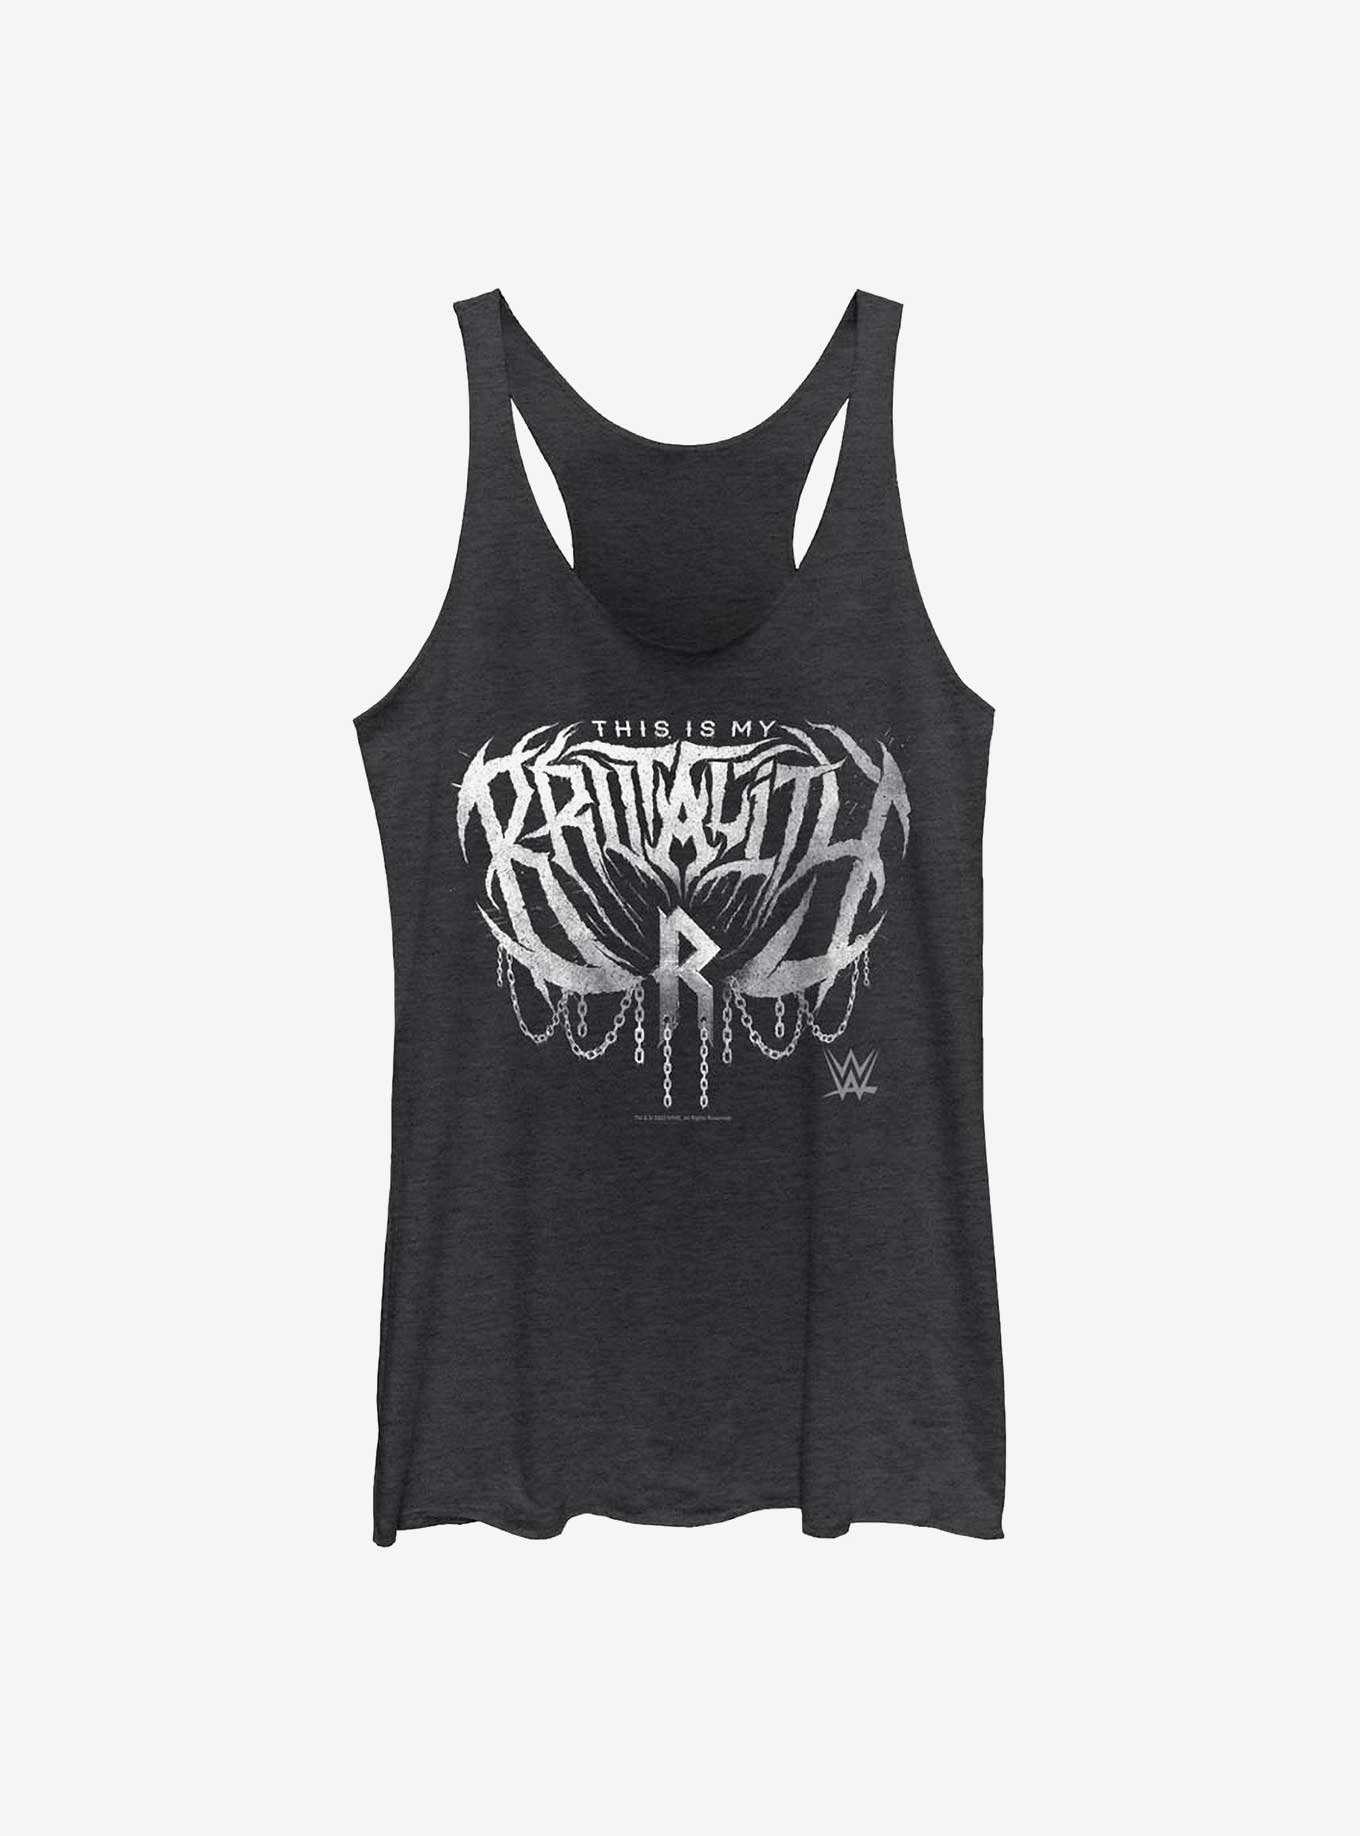 WWE Rhea Ripley This Is My Brutality Womens Tank Top, , hi-res